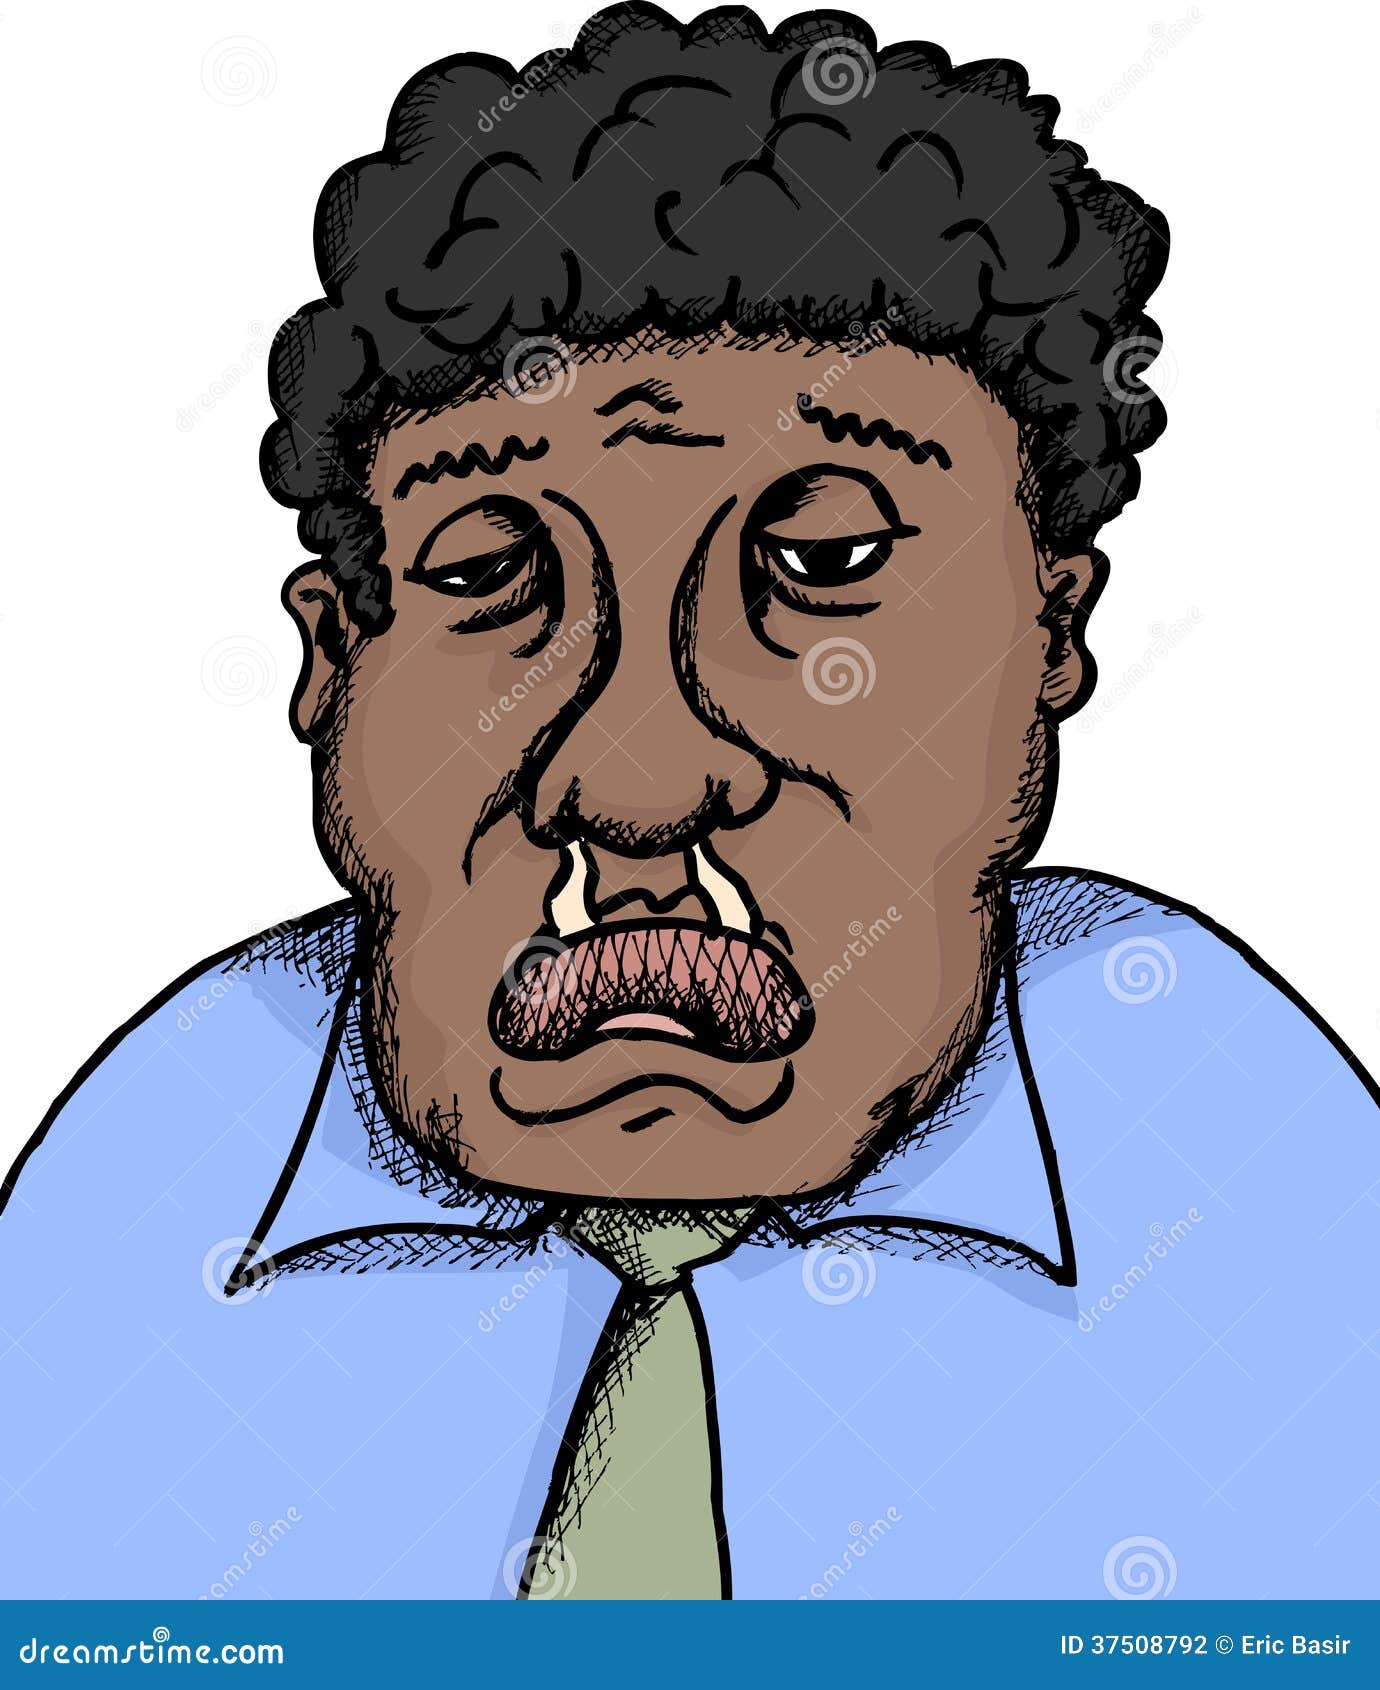 clipart runny nose - photo #45